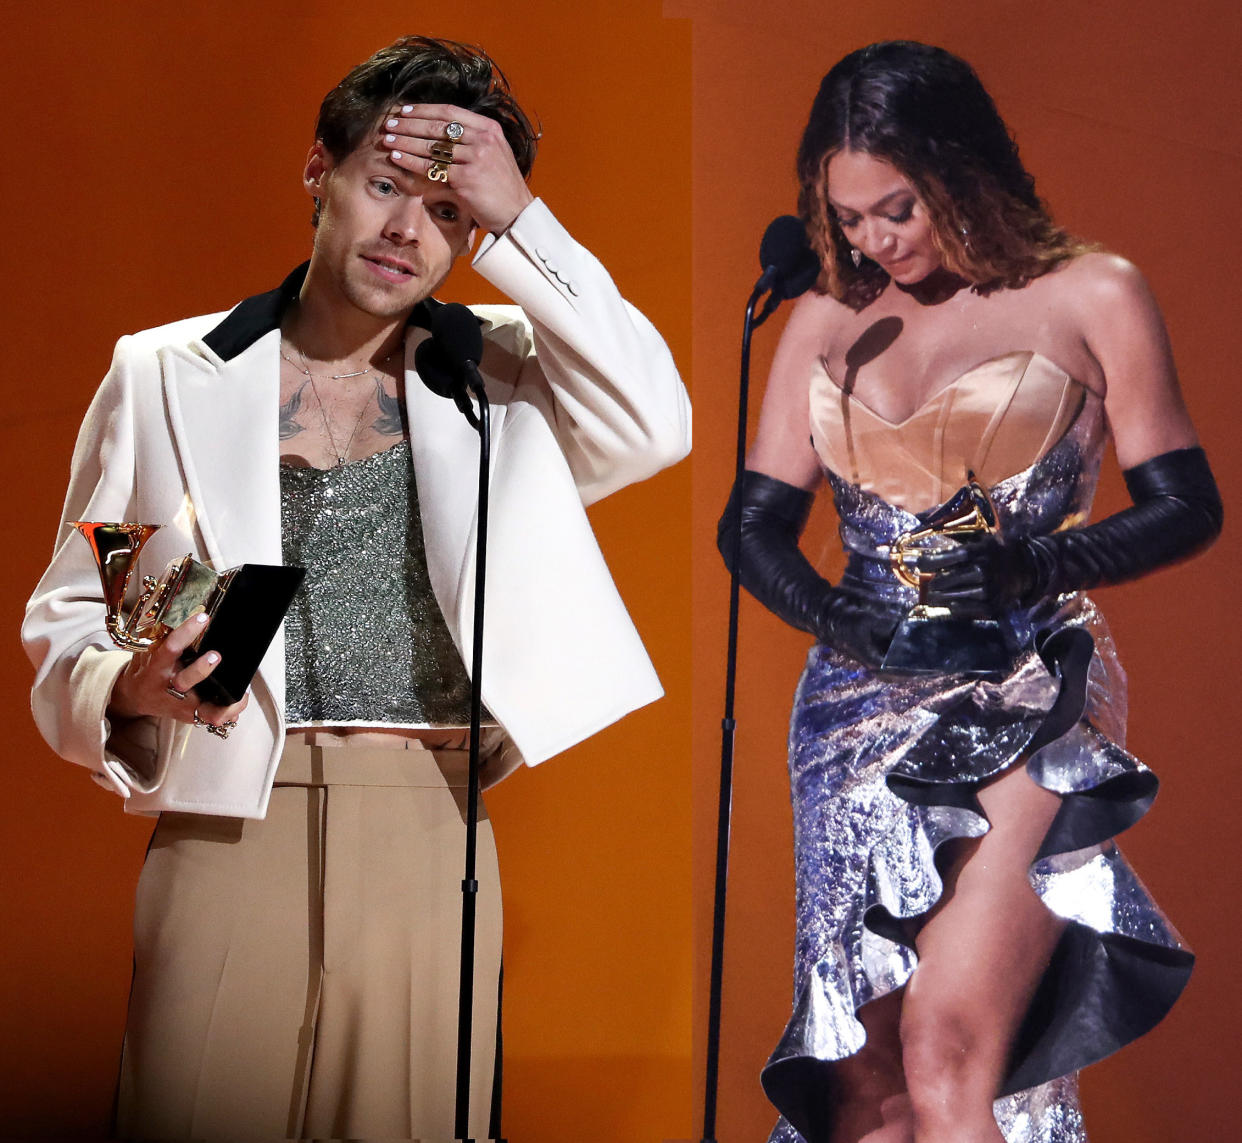 Harry Styles, holding his award for Album of the Year, claps his hand to his forehead in a daze, and Beyoncé, in a separate photo, receiving one of her awards, looks humbly to the floor.